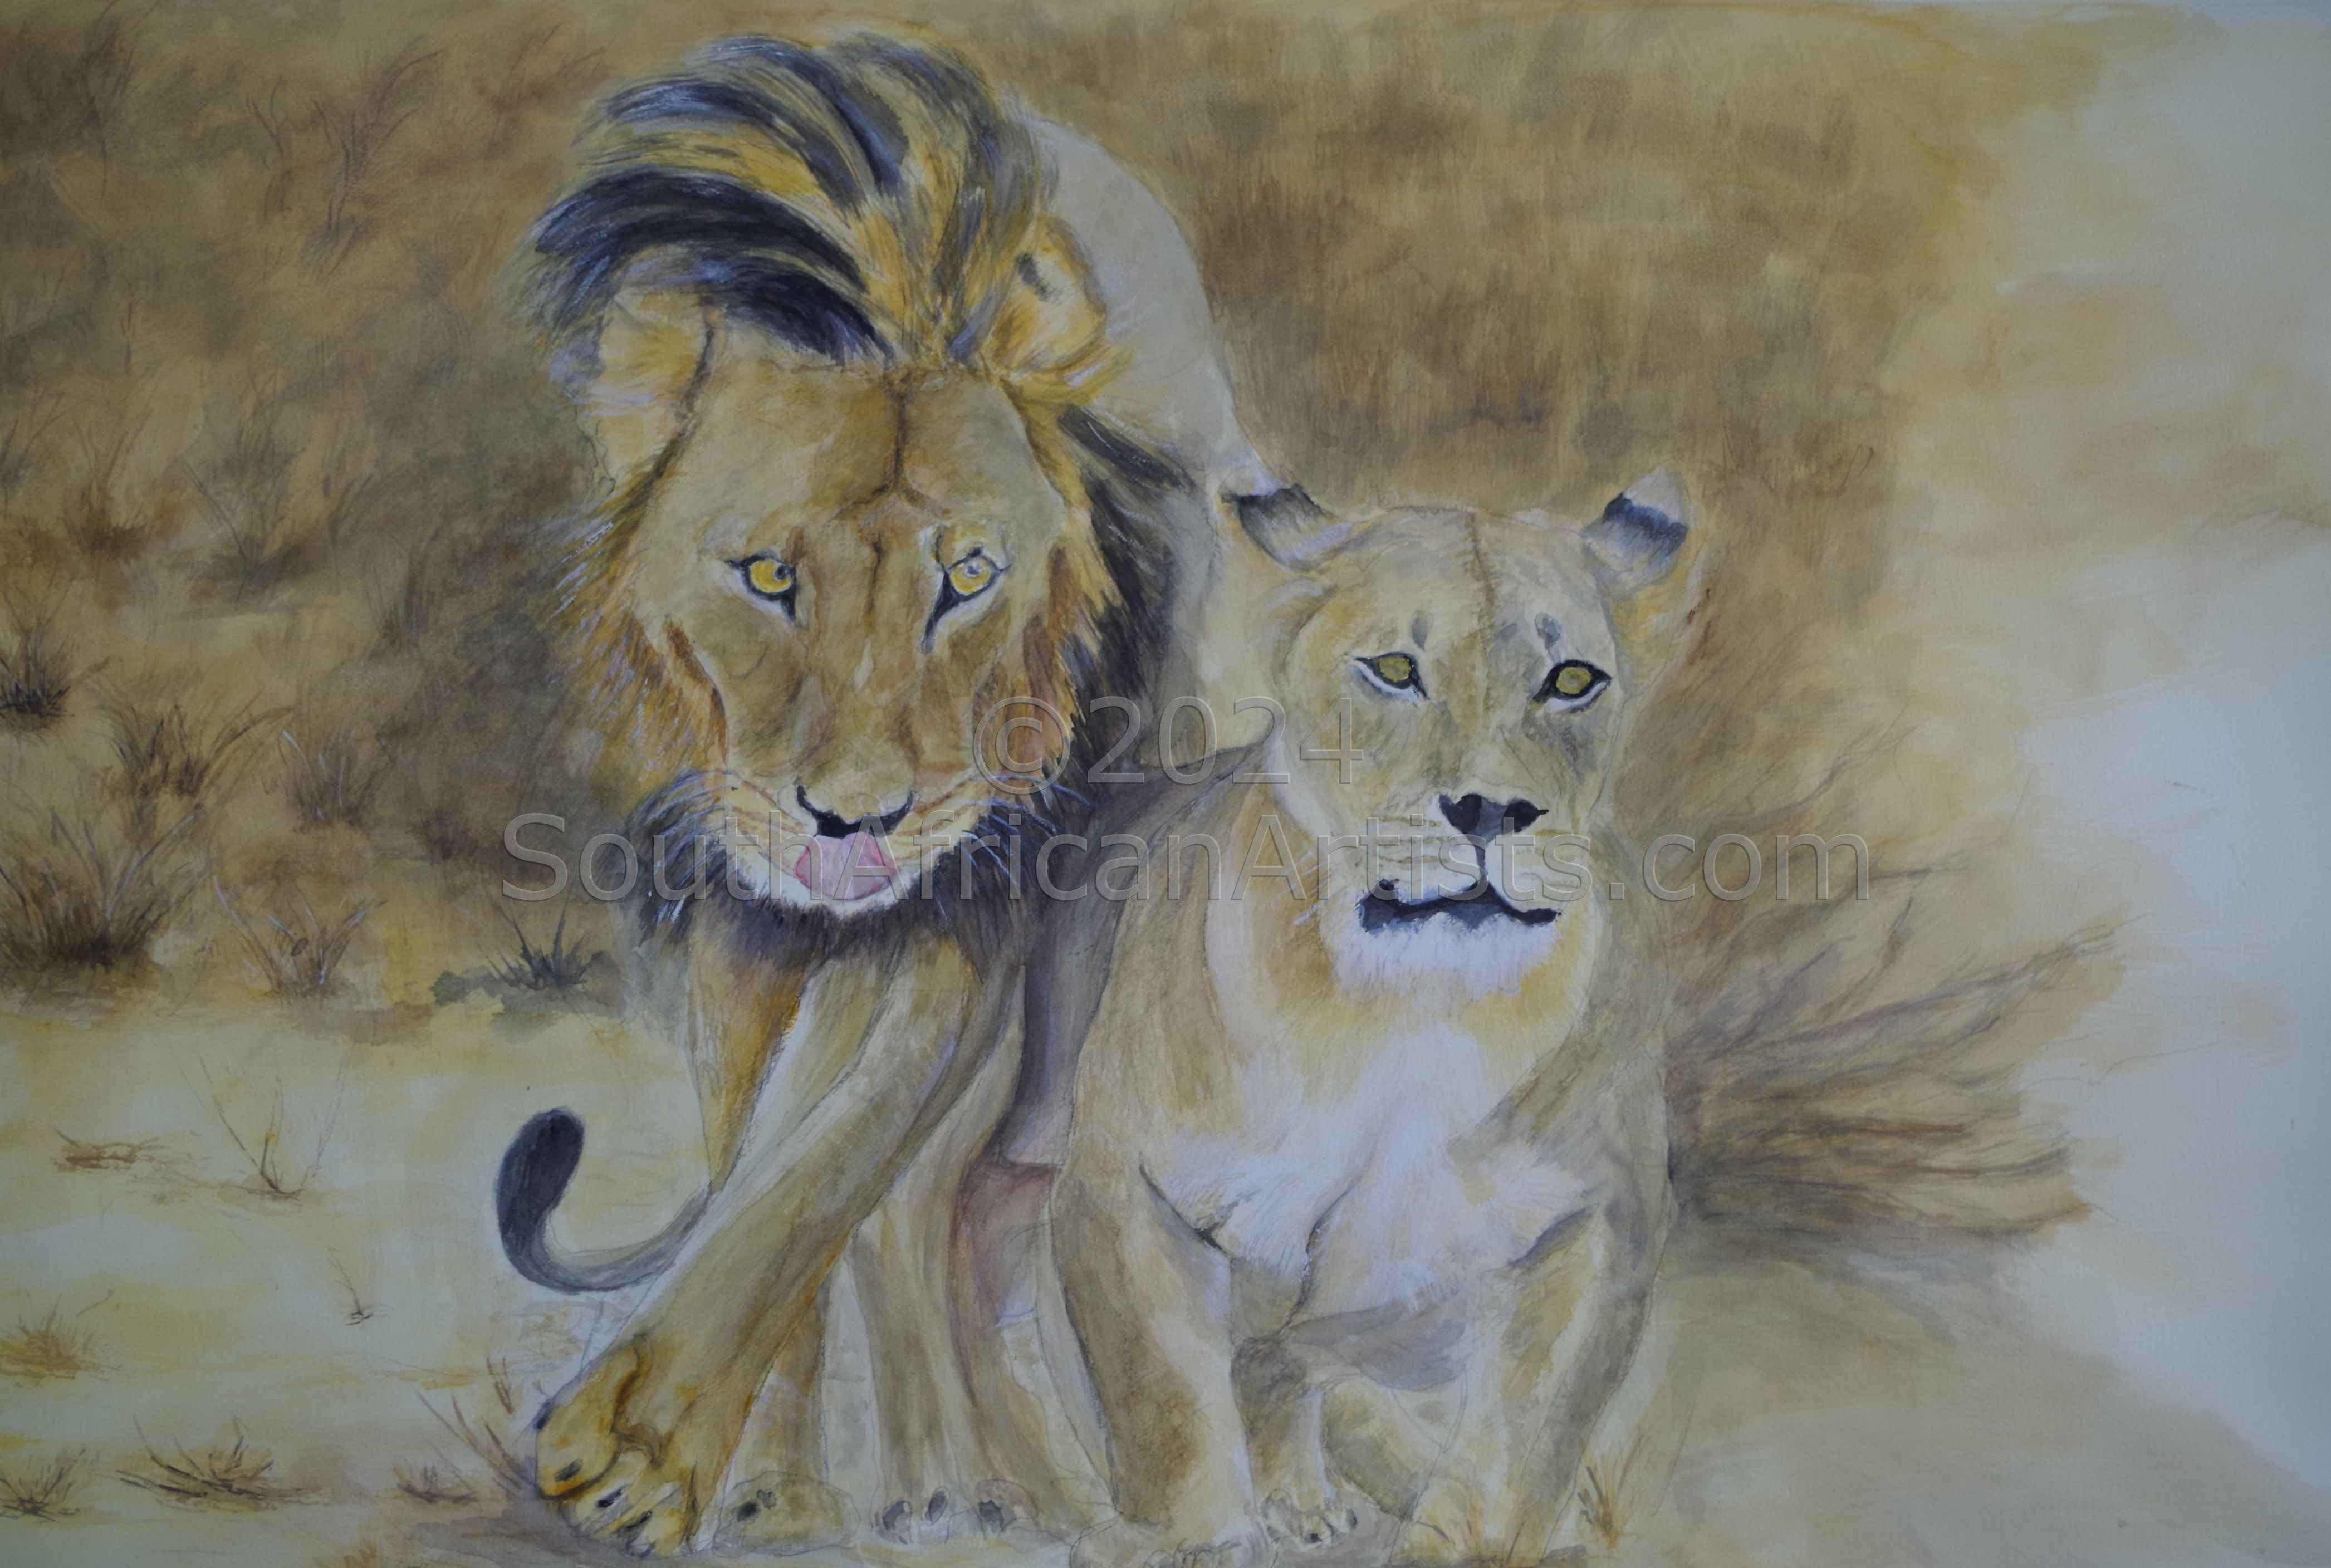 lion mating drawing